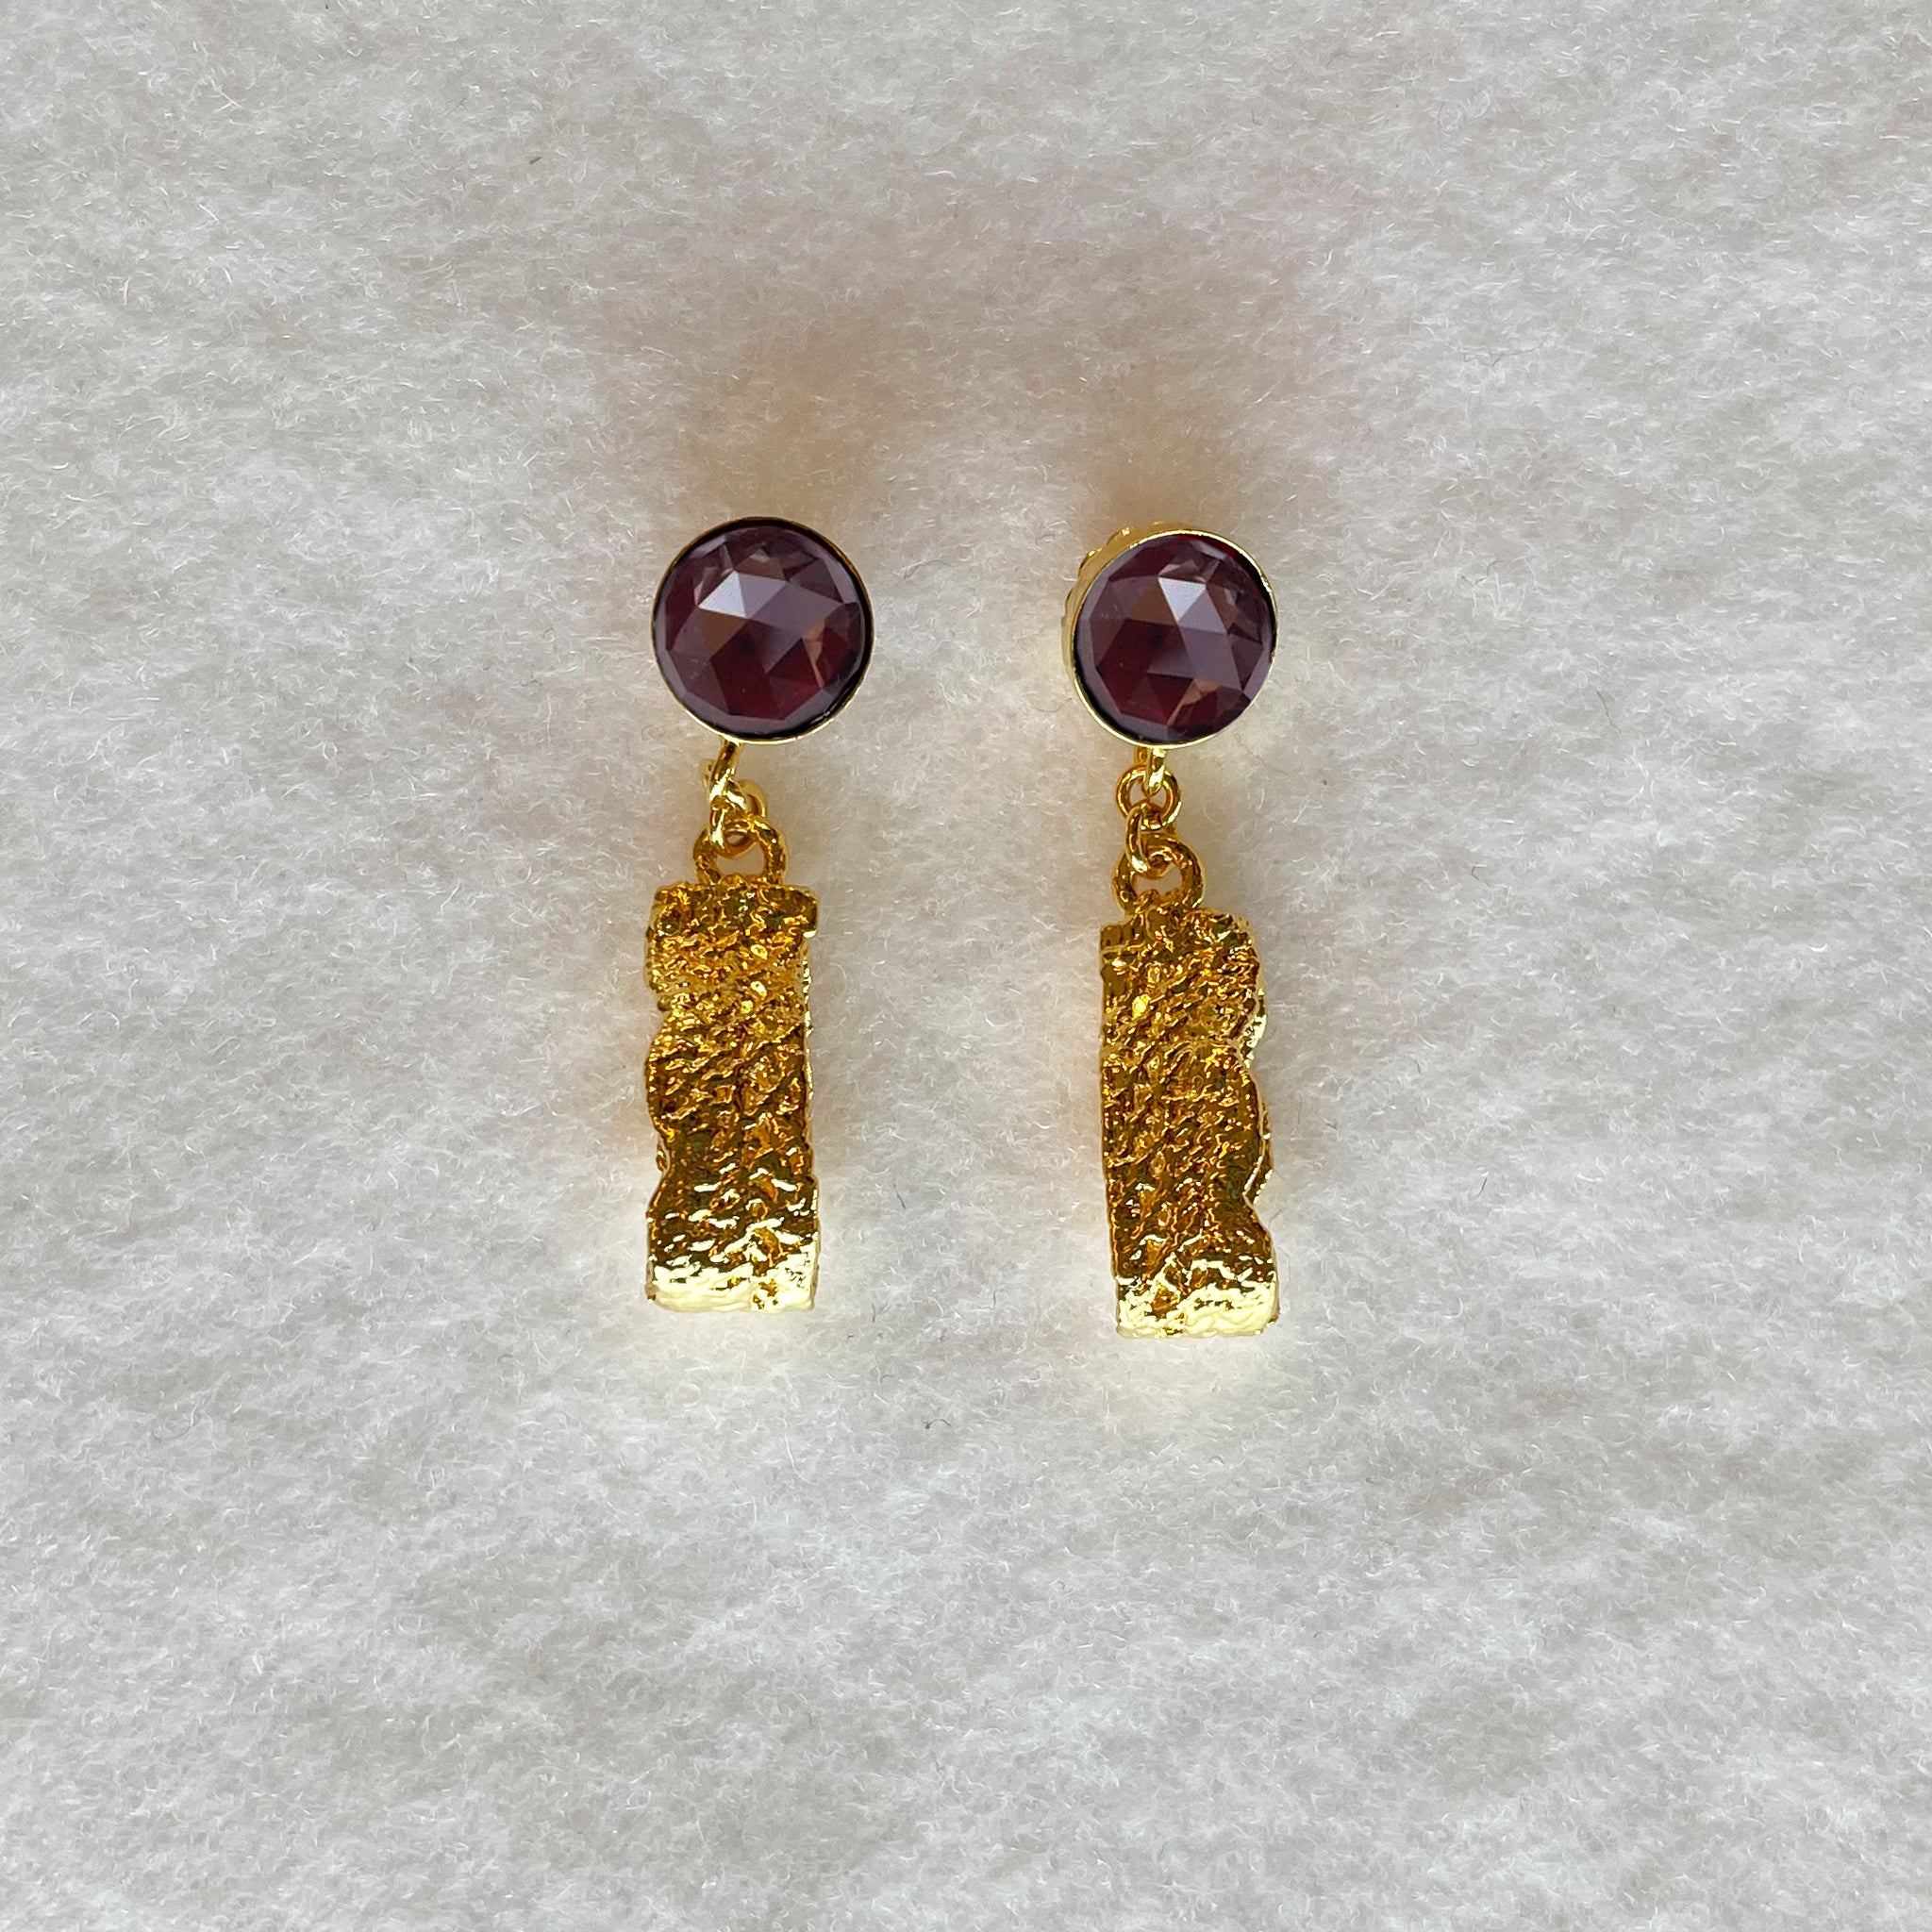 Gold Earring Under 5000 Rs | safewindows.co.uk